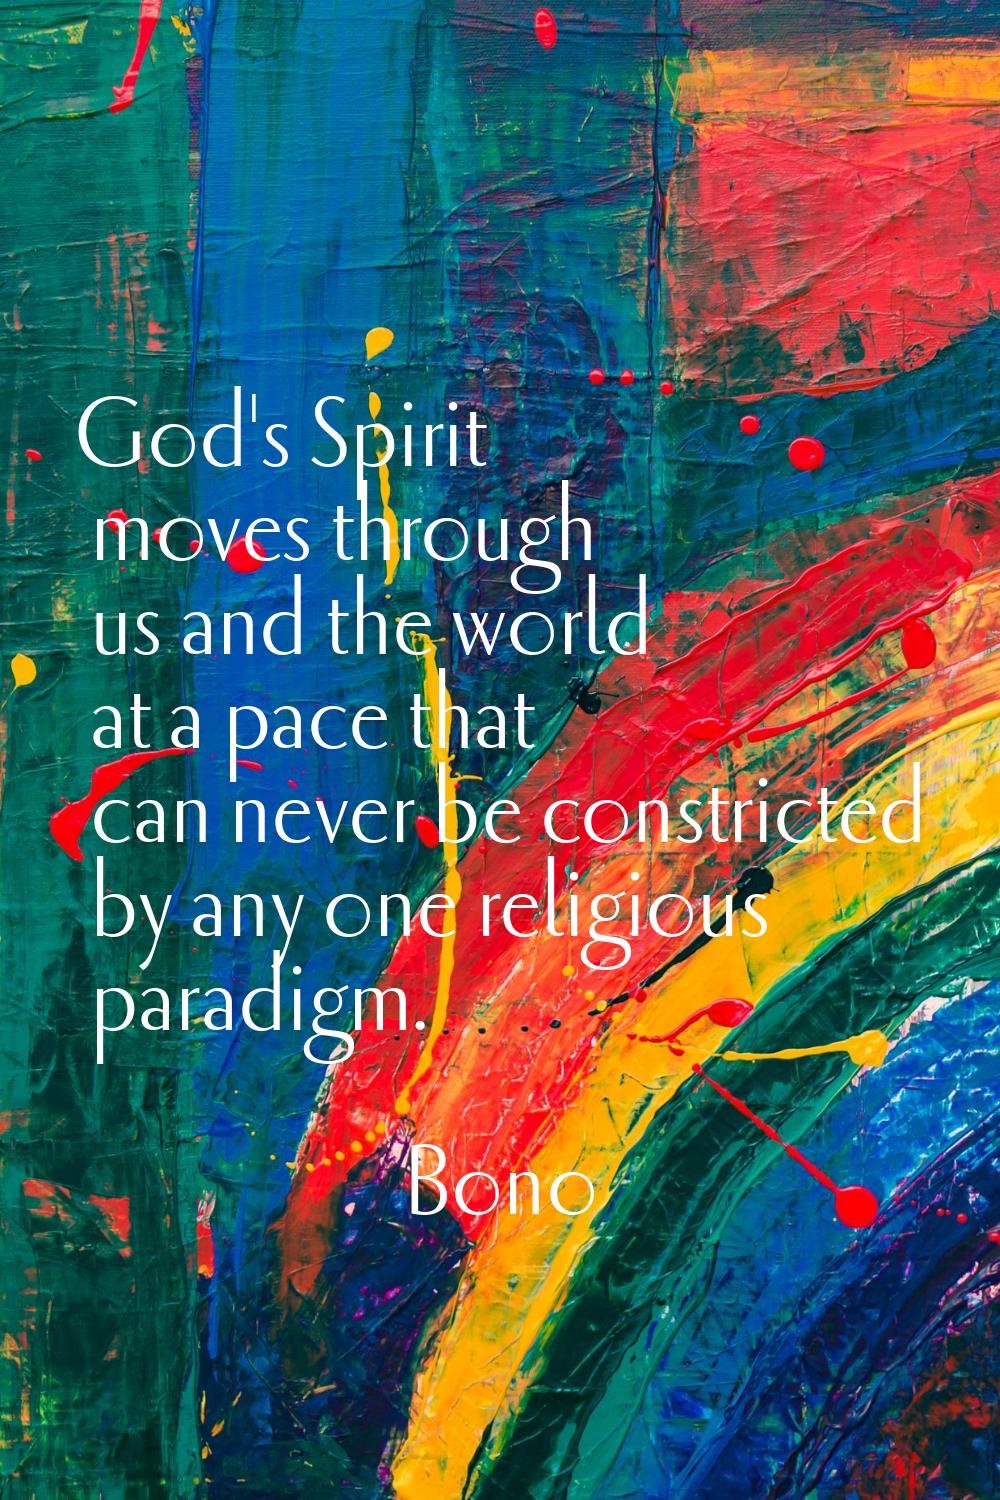 God's Spirit moves through us and the world at a pace that can never be constricted by any one reli